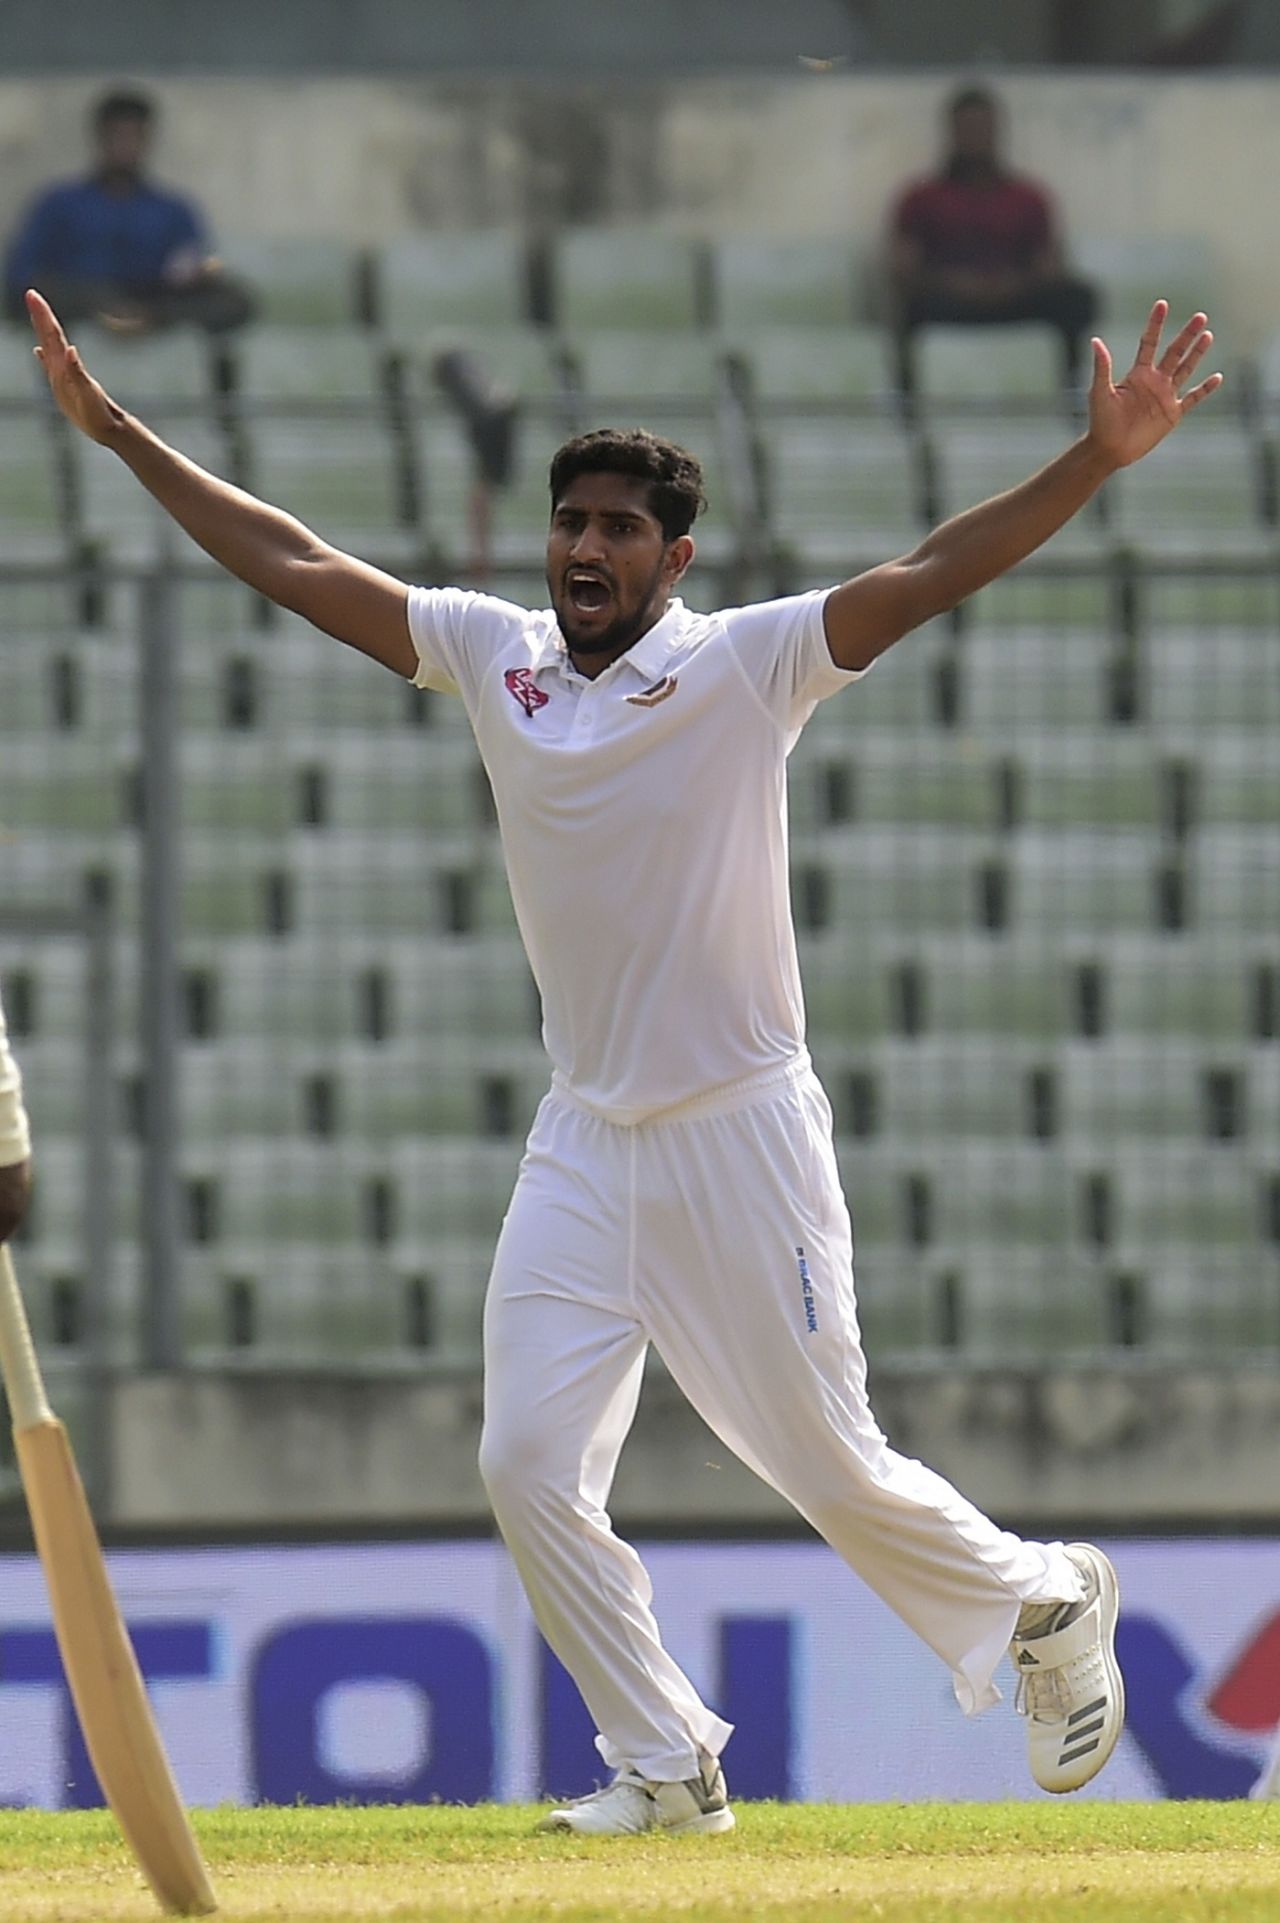 Khaled Ahmed appeals for leg before wicket, Bangladesh v Zimbabwe, 2nd Test, Mirpur, 3rd day, November 13, 2018